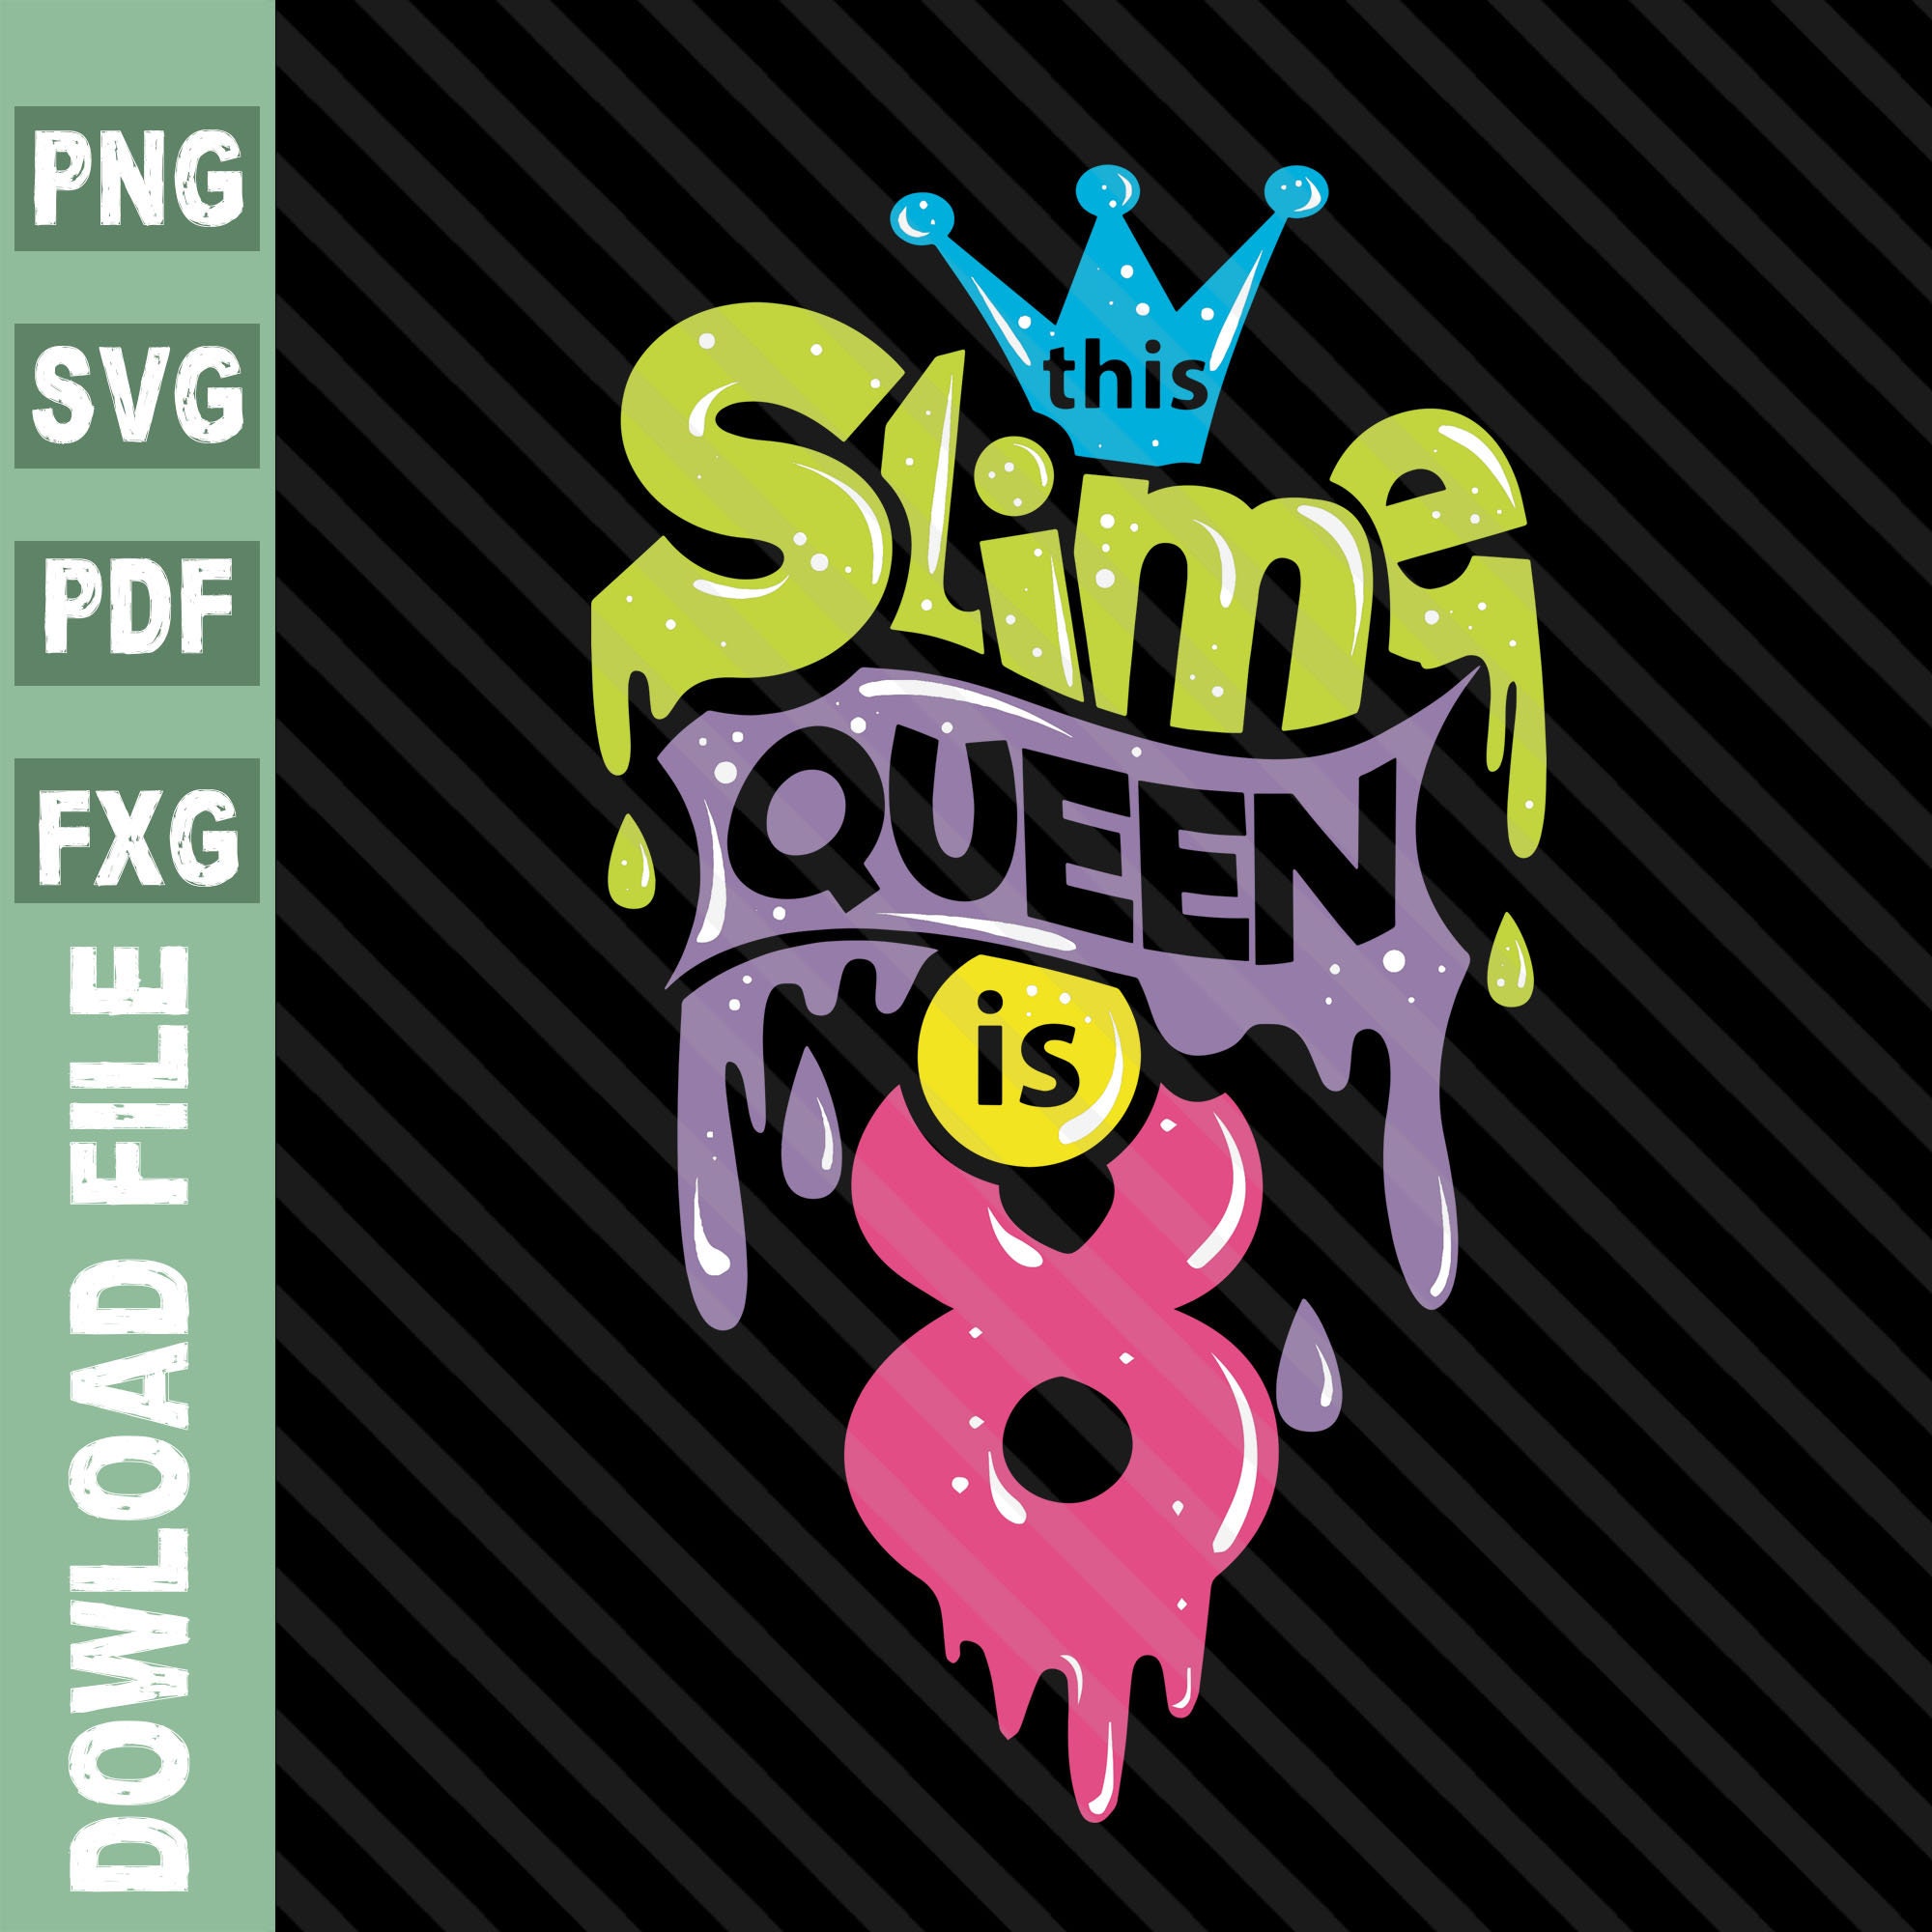 Slime Family Coloring SVG, Slime Coloring Page, Slime Birthday Theme SVG 